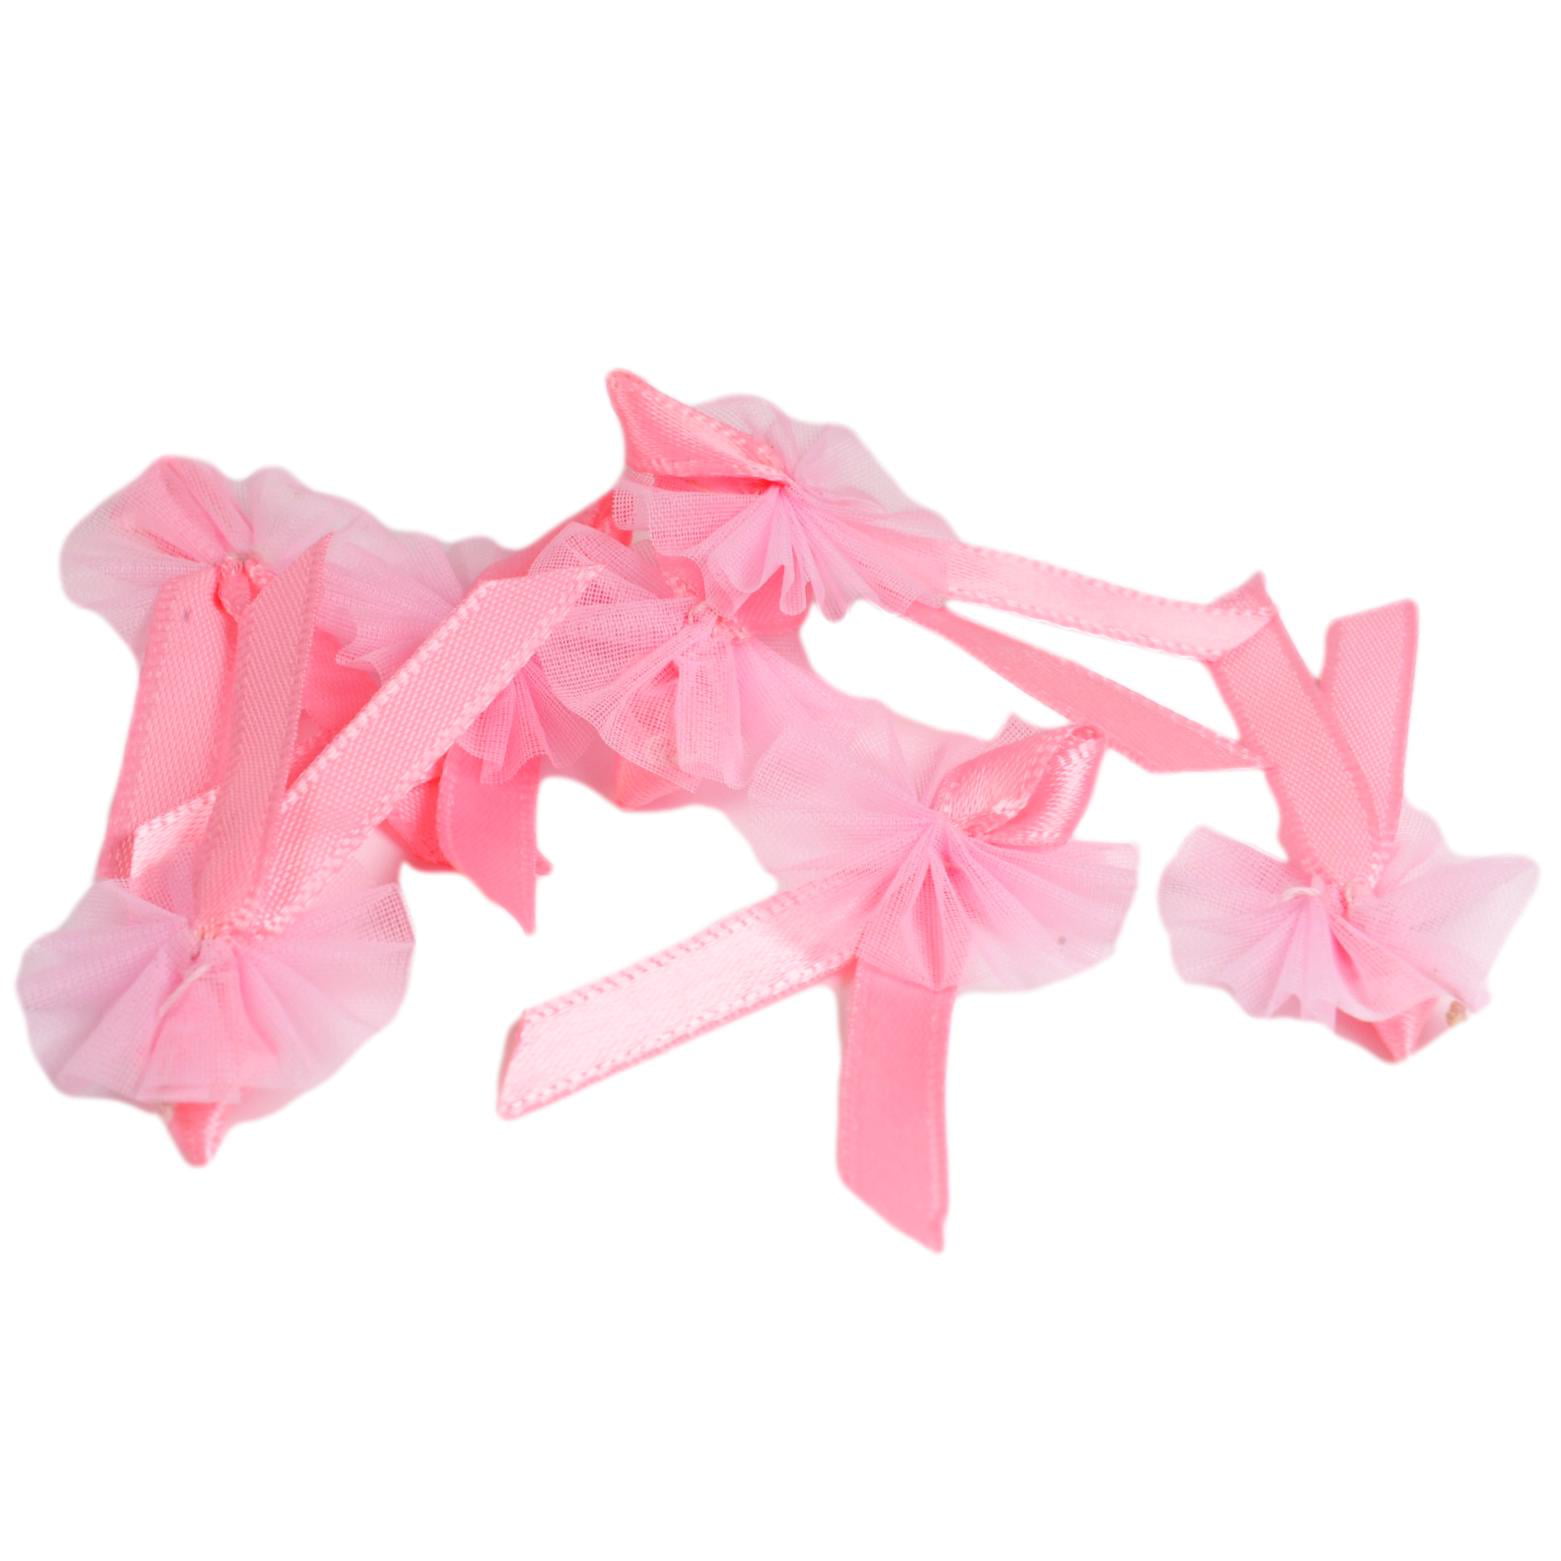 Satin Ribbon Bows with Chiffon - Porcelynne Lingerie Supplies